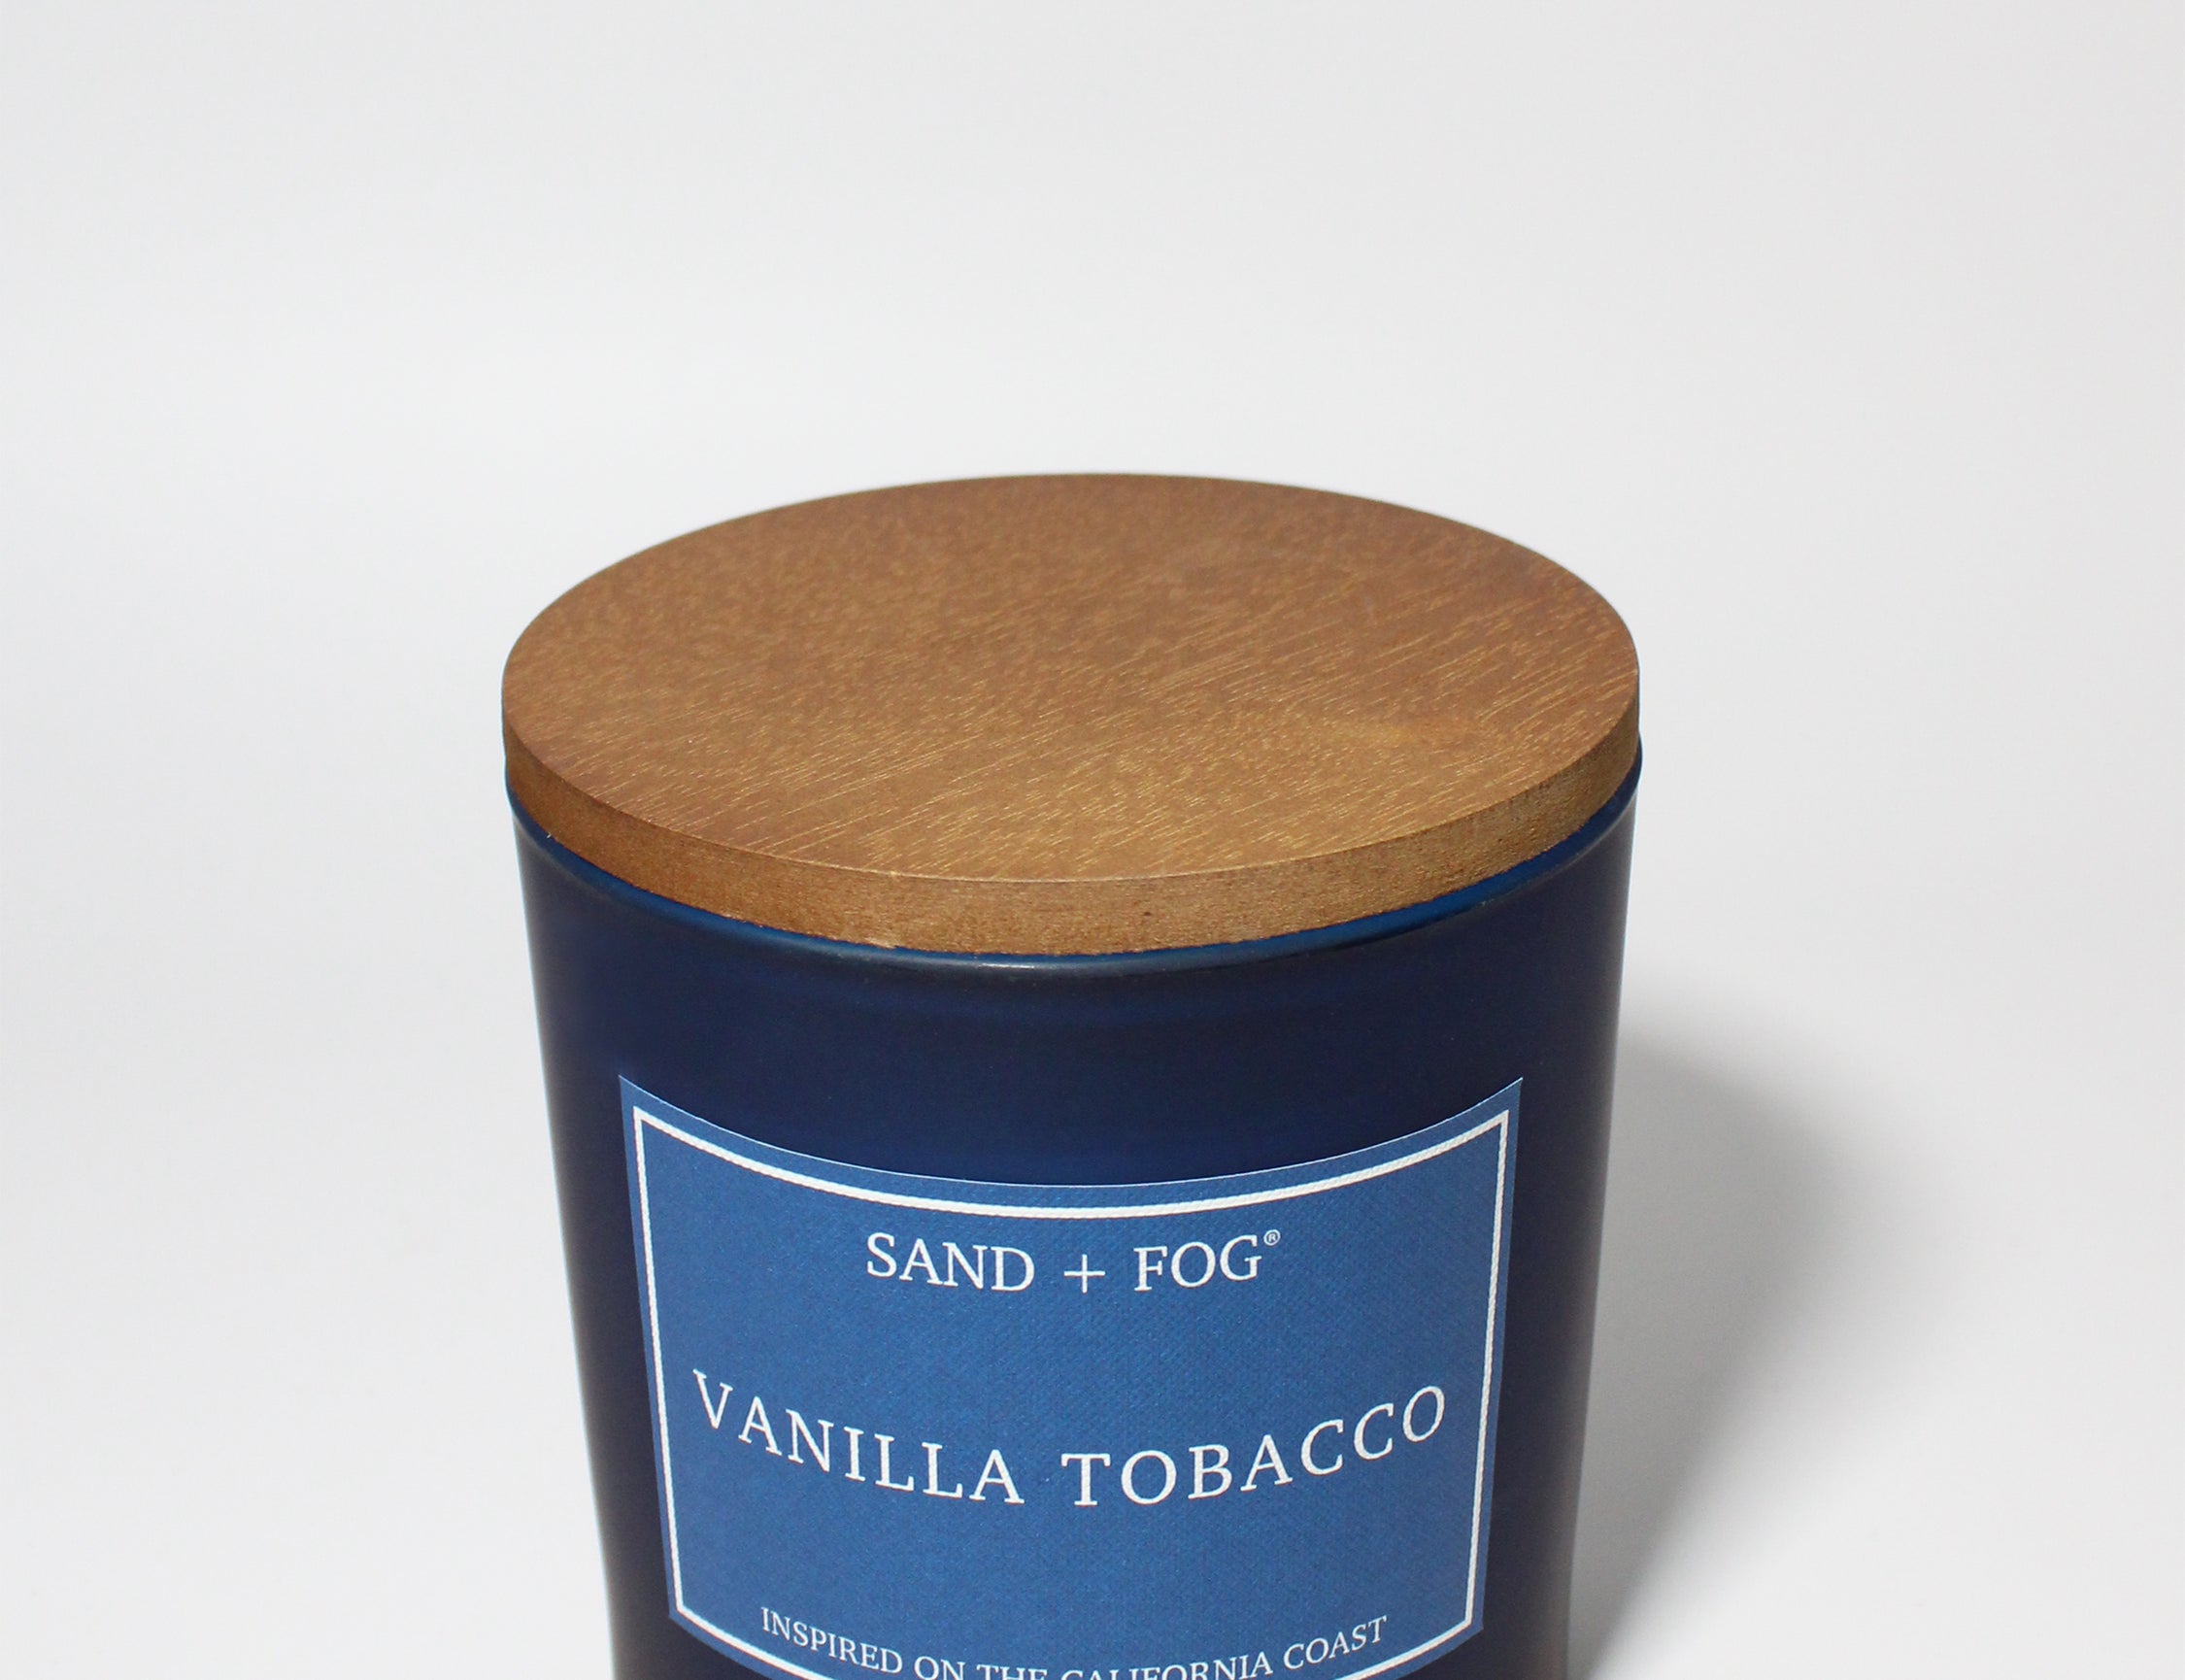 Vanilla Tobacco 21 oz scented candle Navy vessel with Wood lid